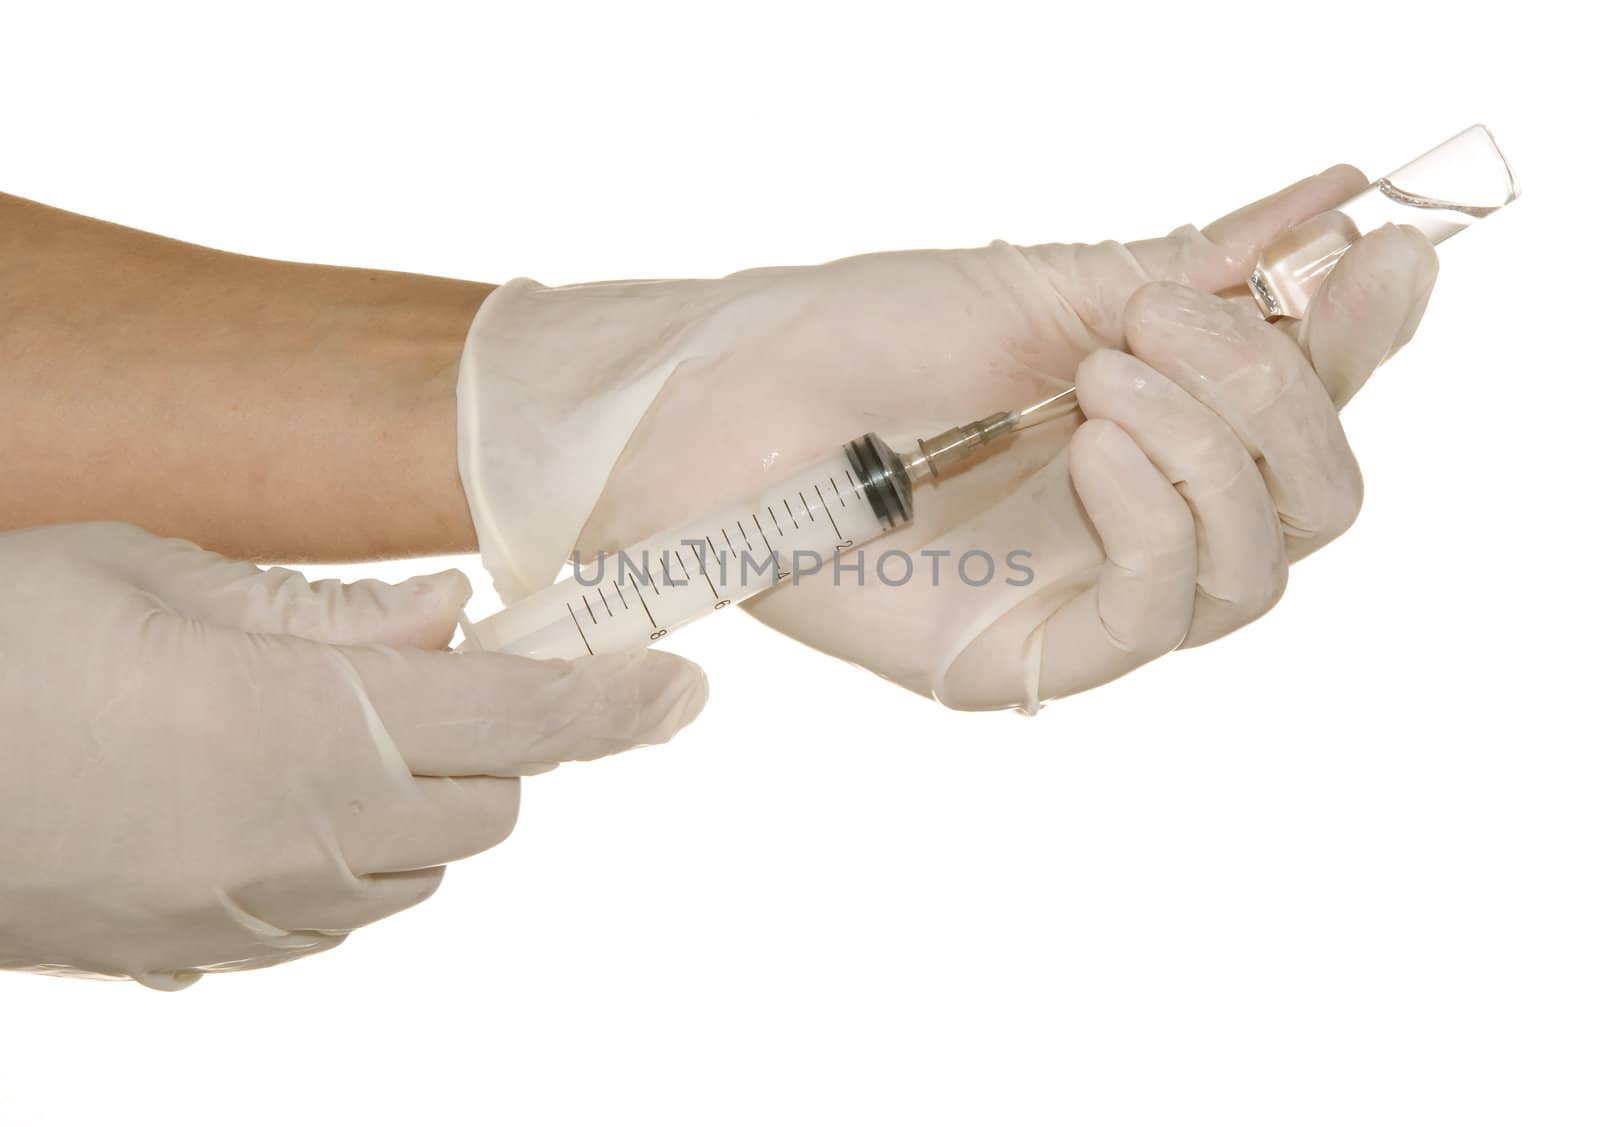 syringe in his hand on a white background